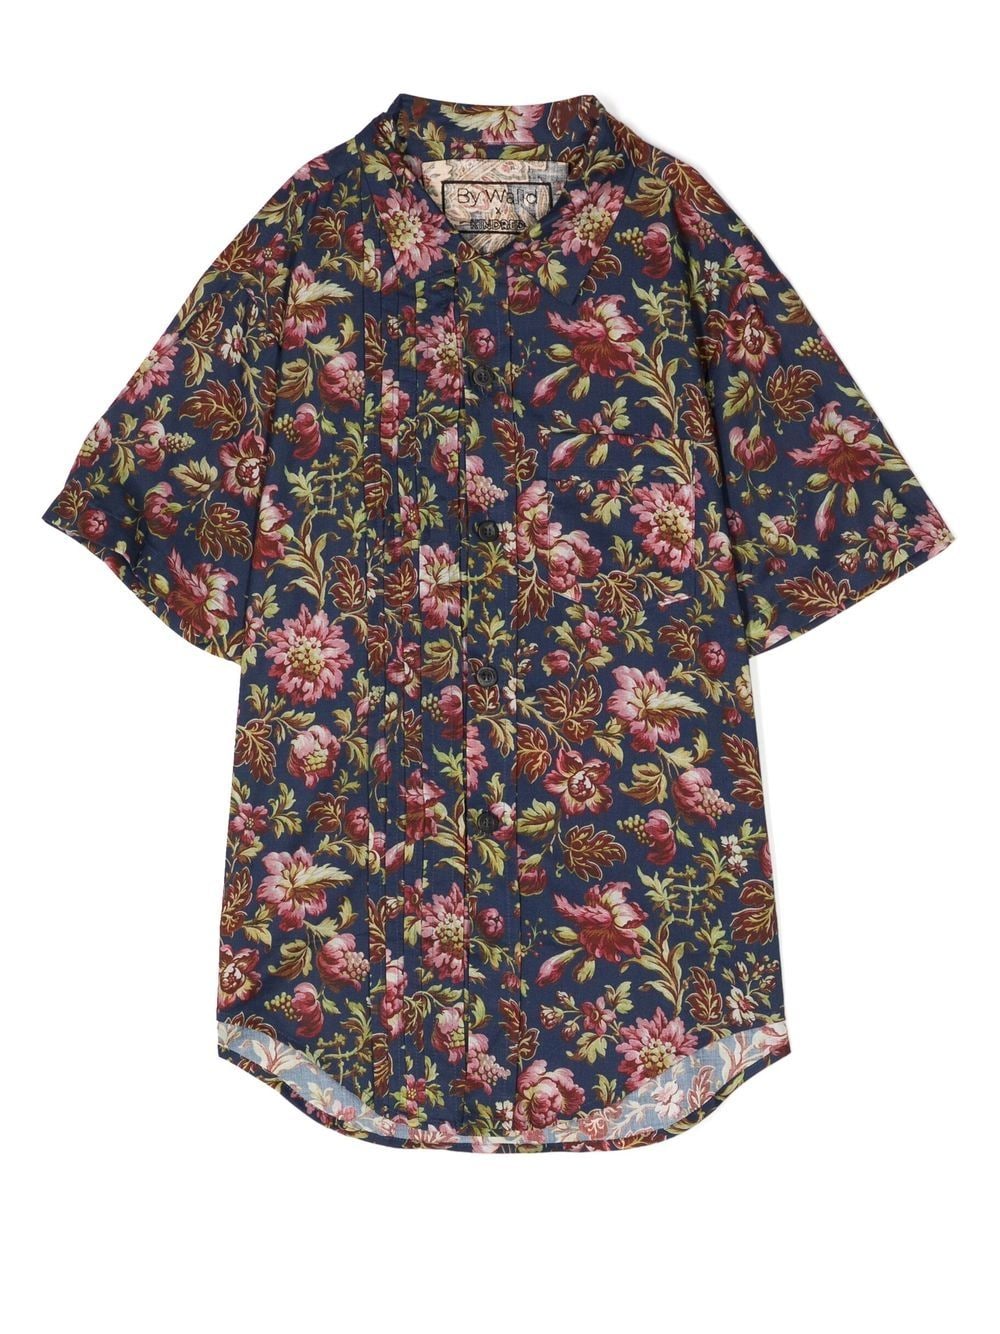 By Walid x Kindred floral-print short-sleeve shirt - Blue von By Walid